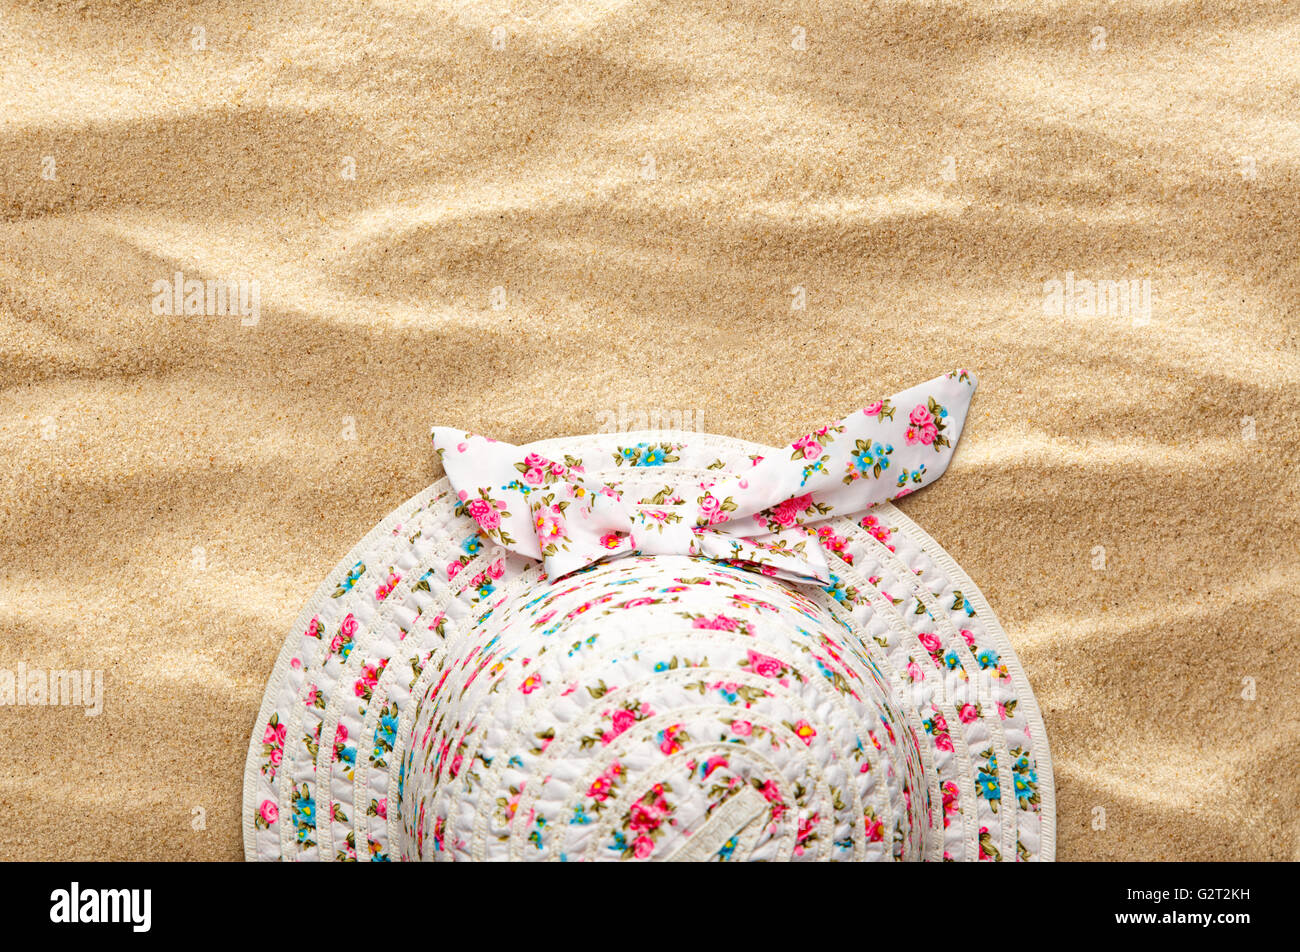 Female sun hat with a bow closeup Stock Photo